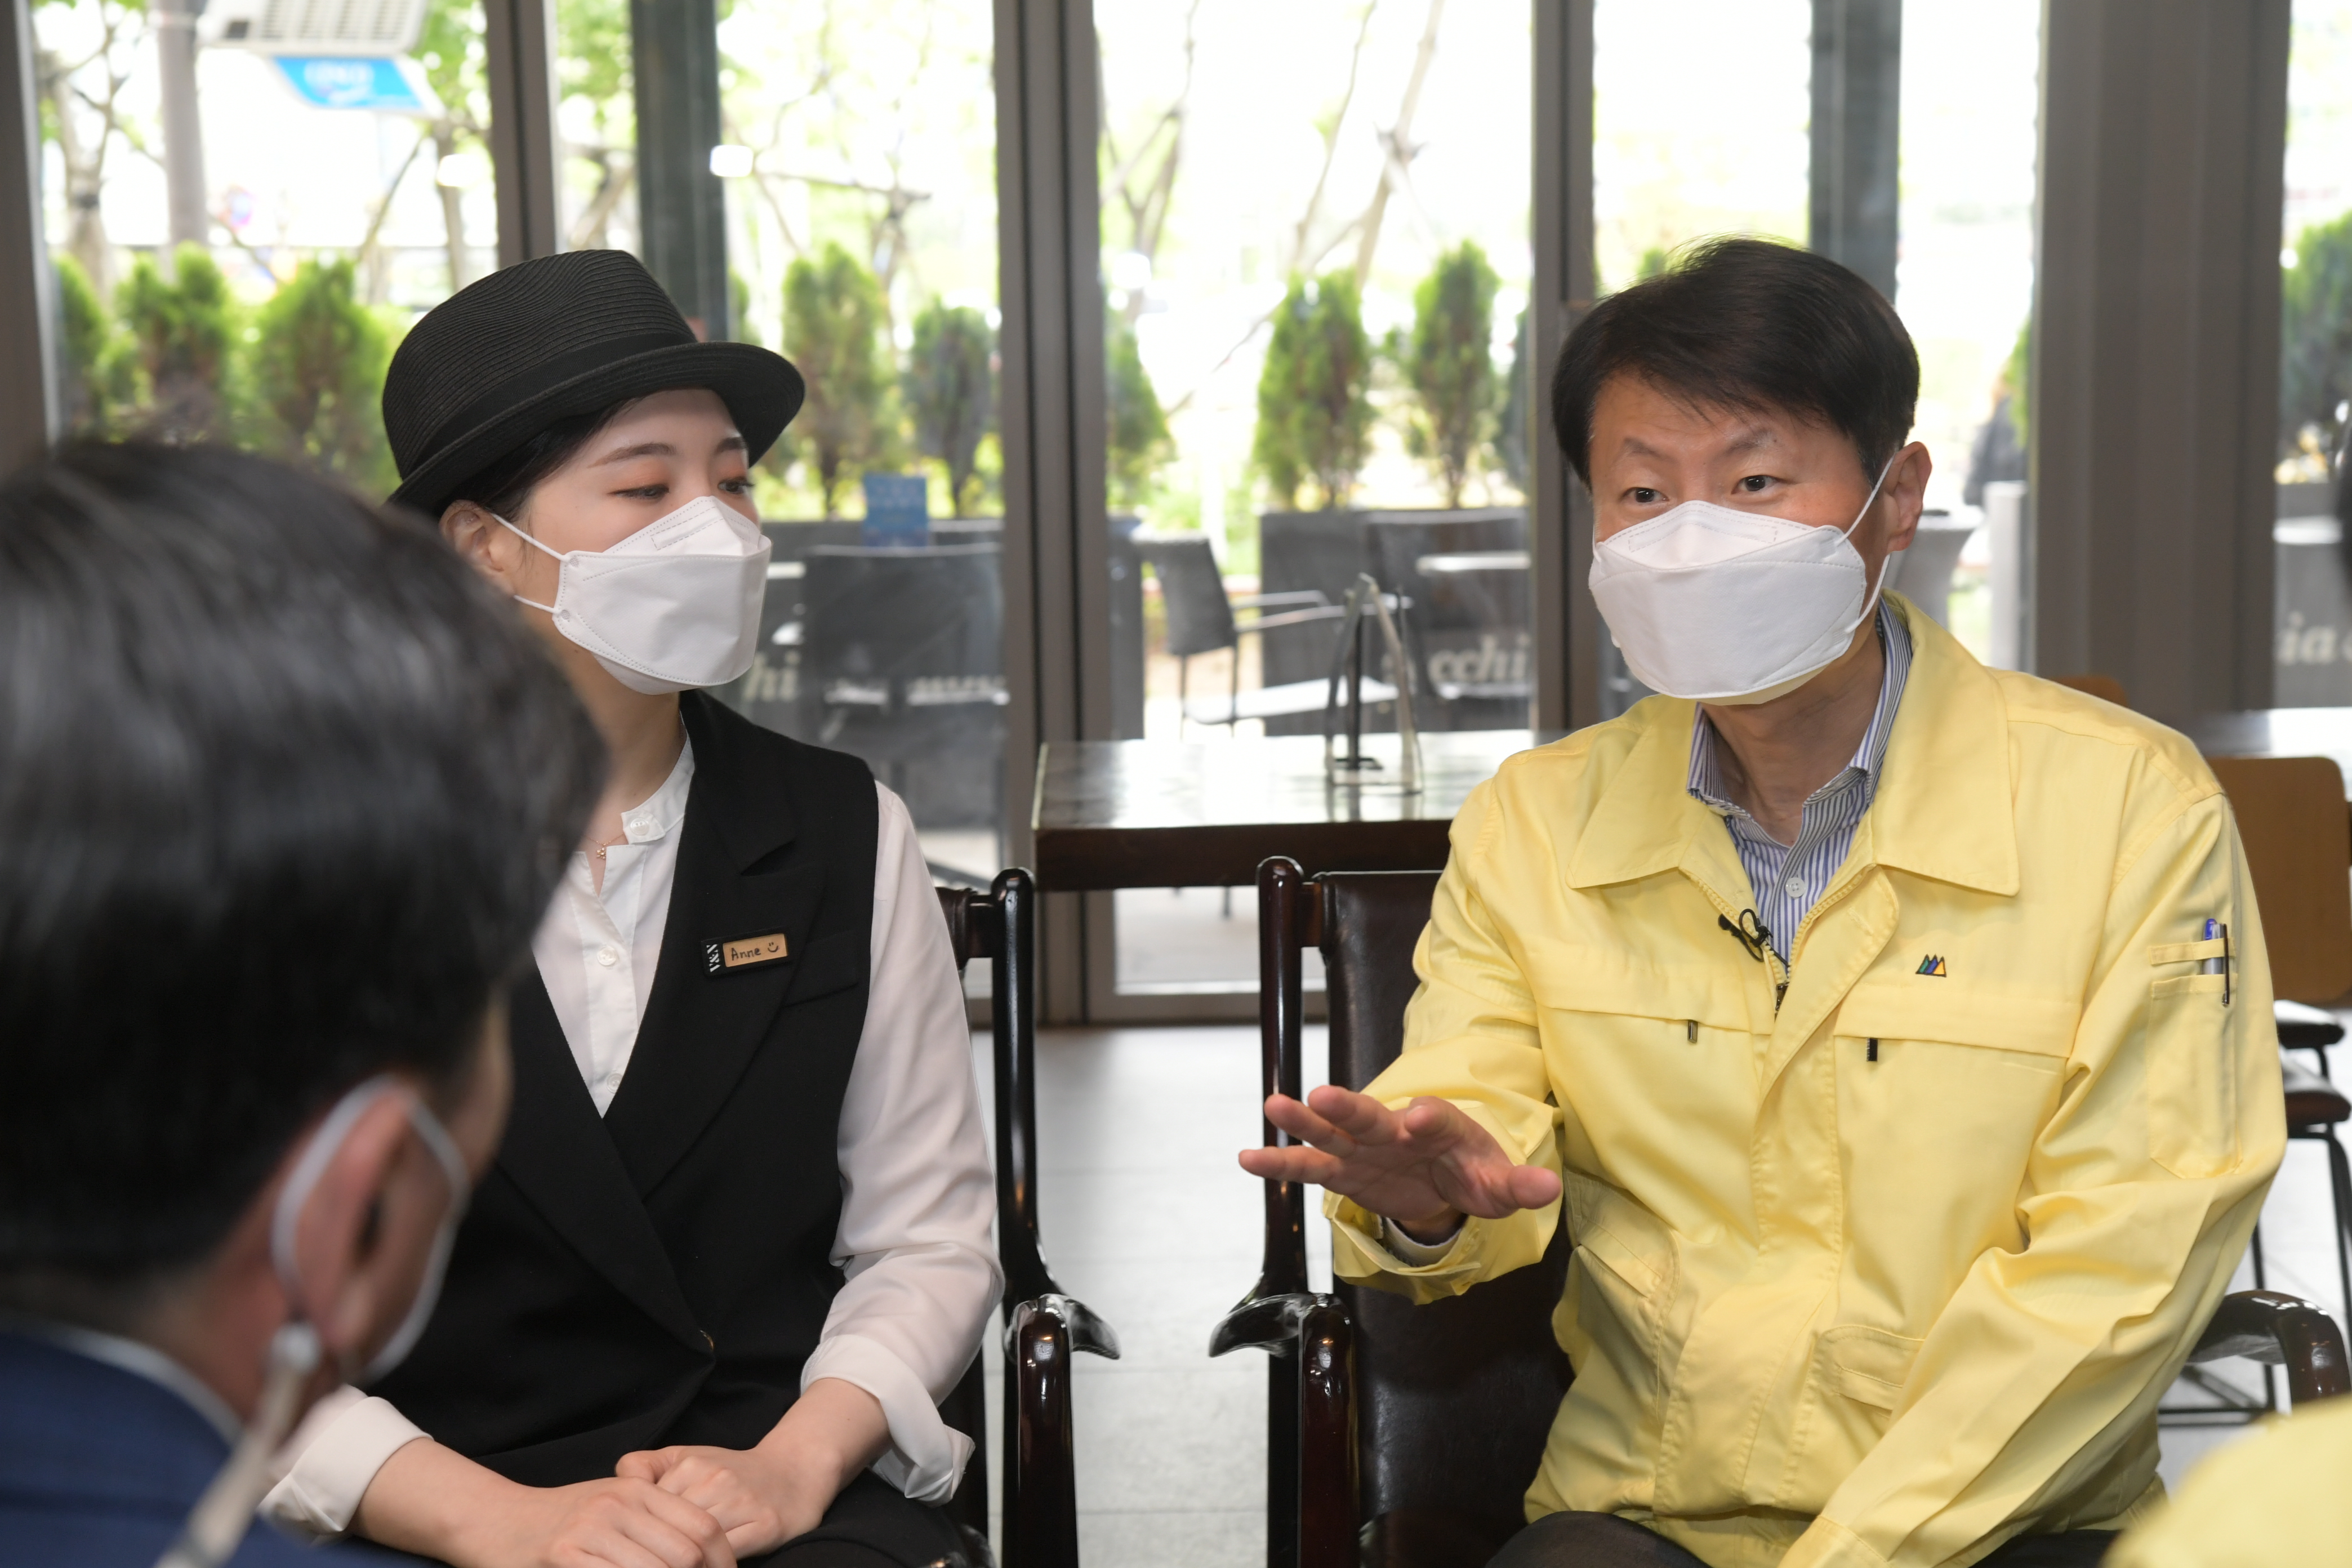 Photo News5 - [April 24, 2021] Minister inspects restaurants to check COVID-19 anti-epidemic measures